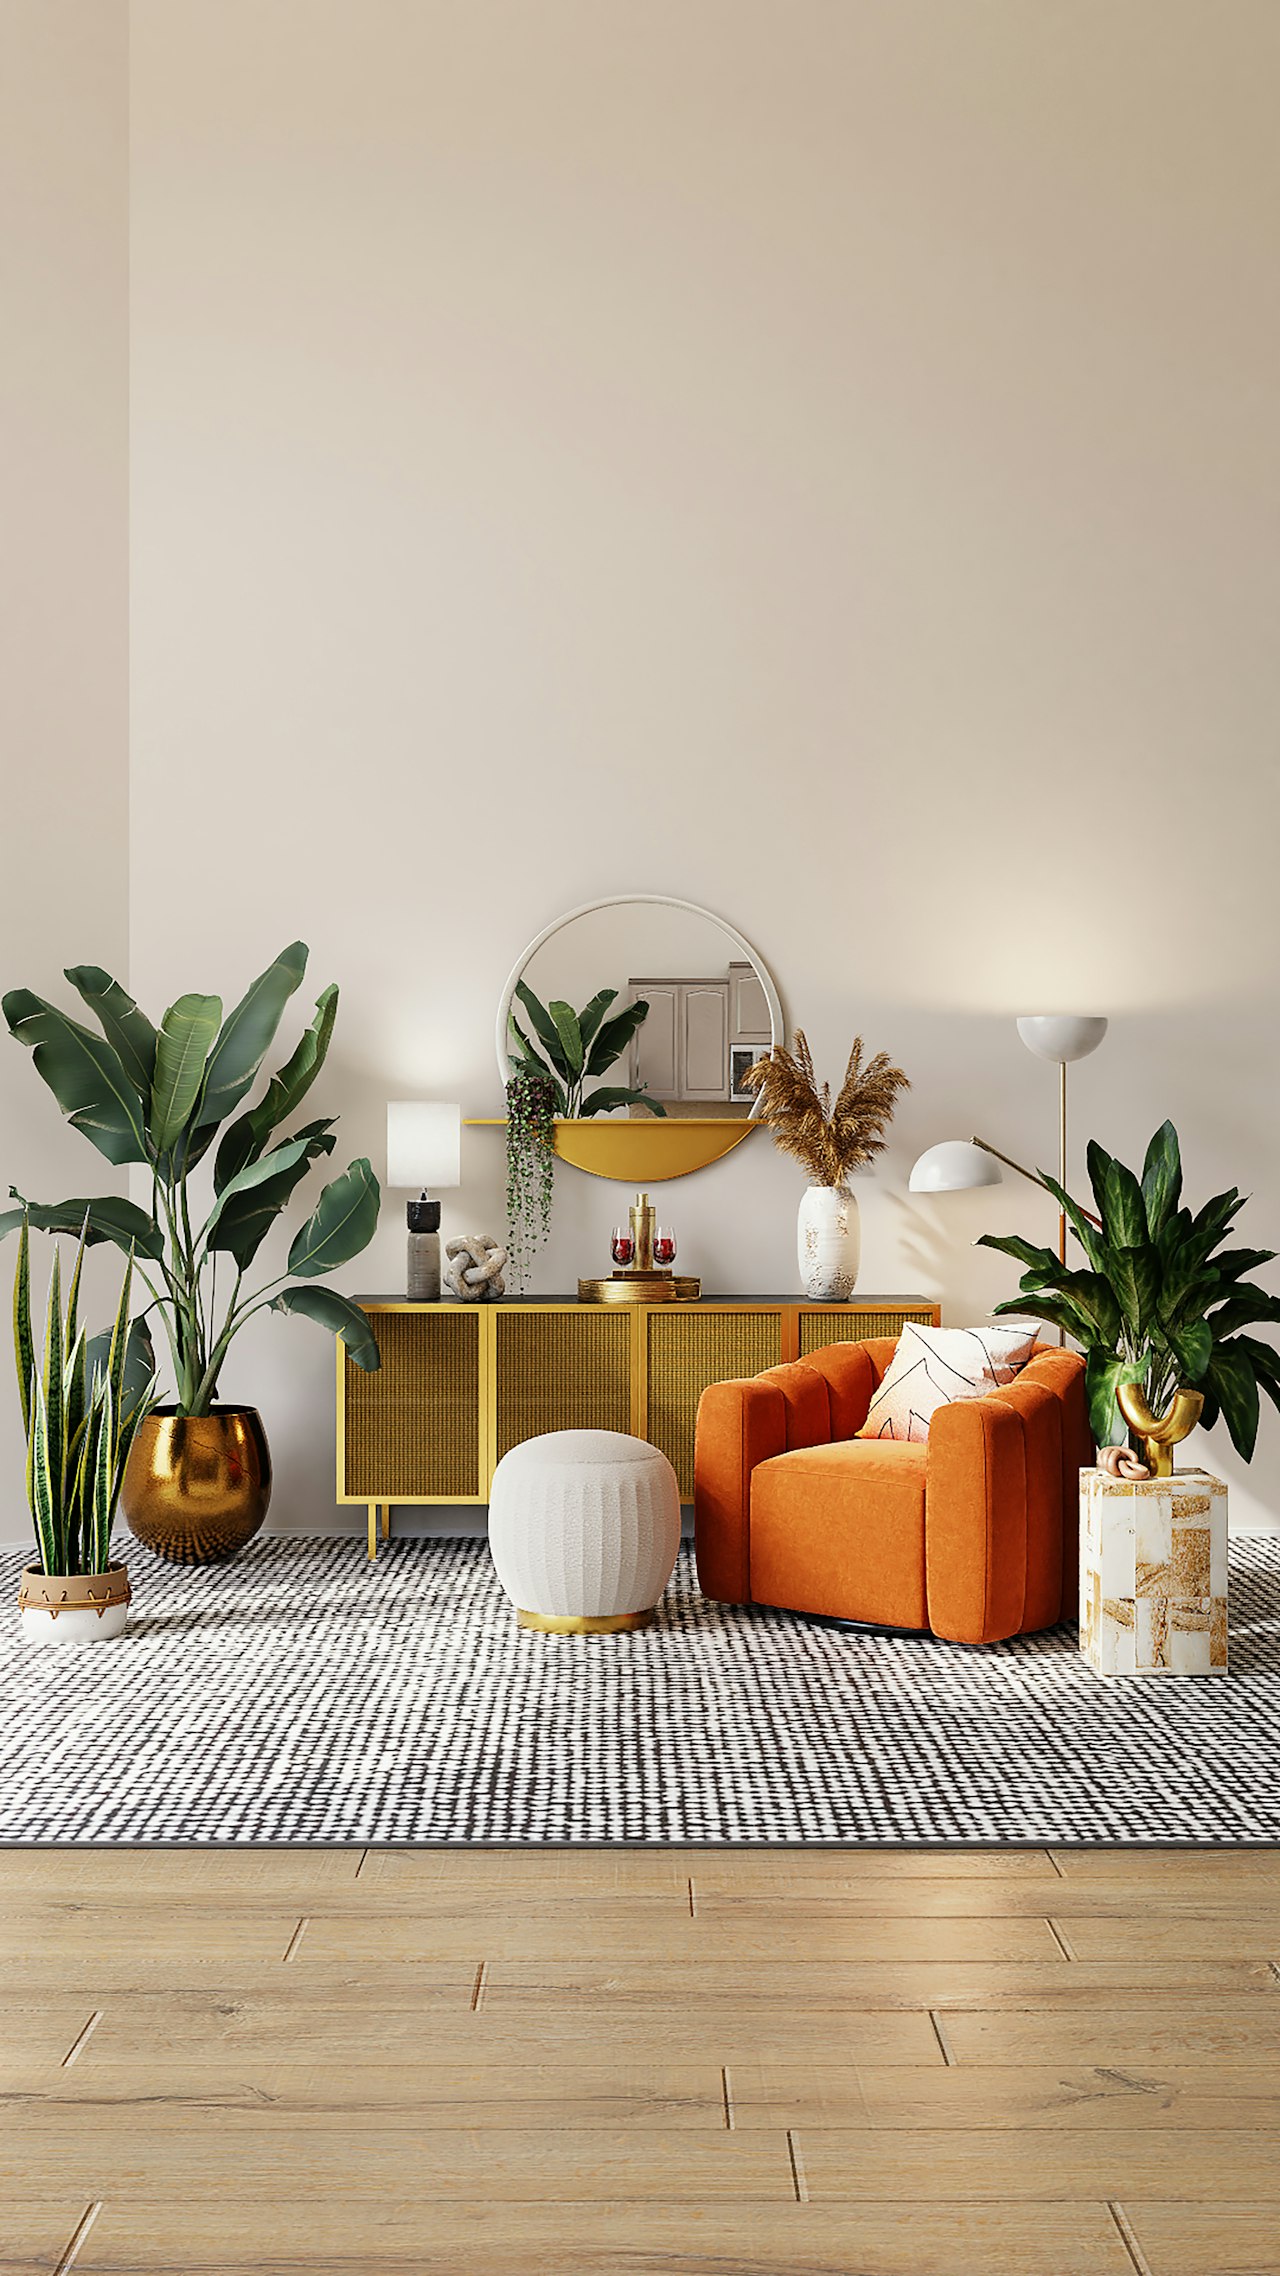 10 Budget-Friendly Ways to Update Your Home Décor